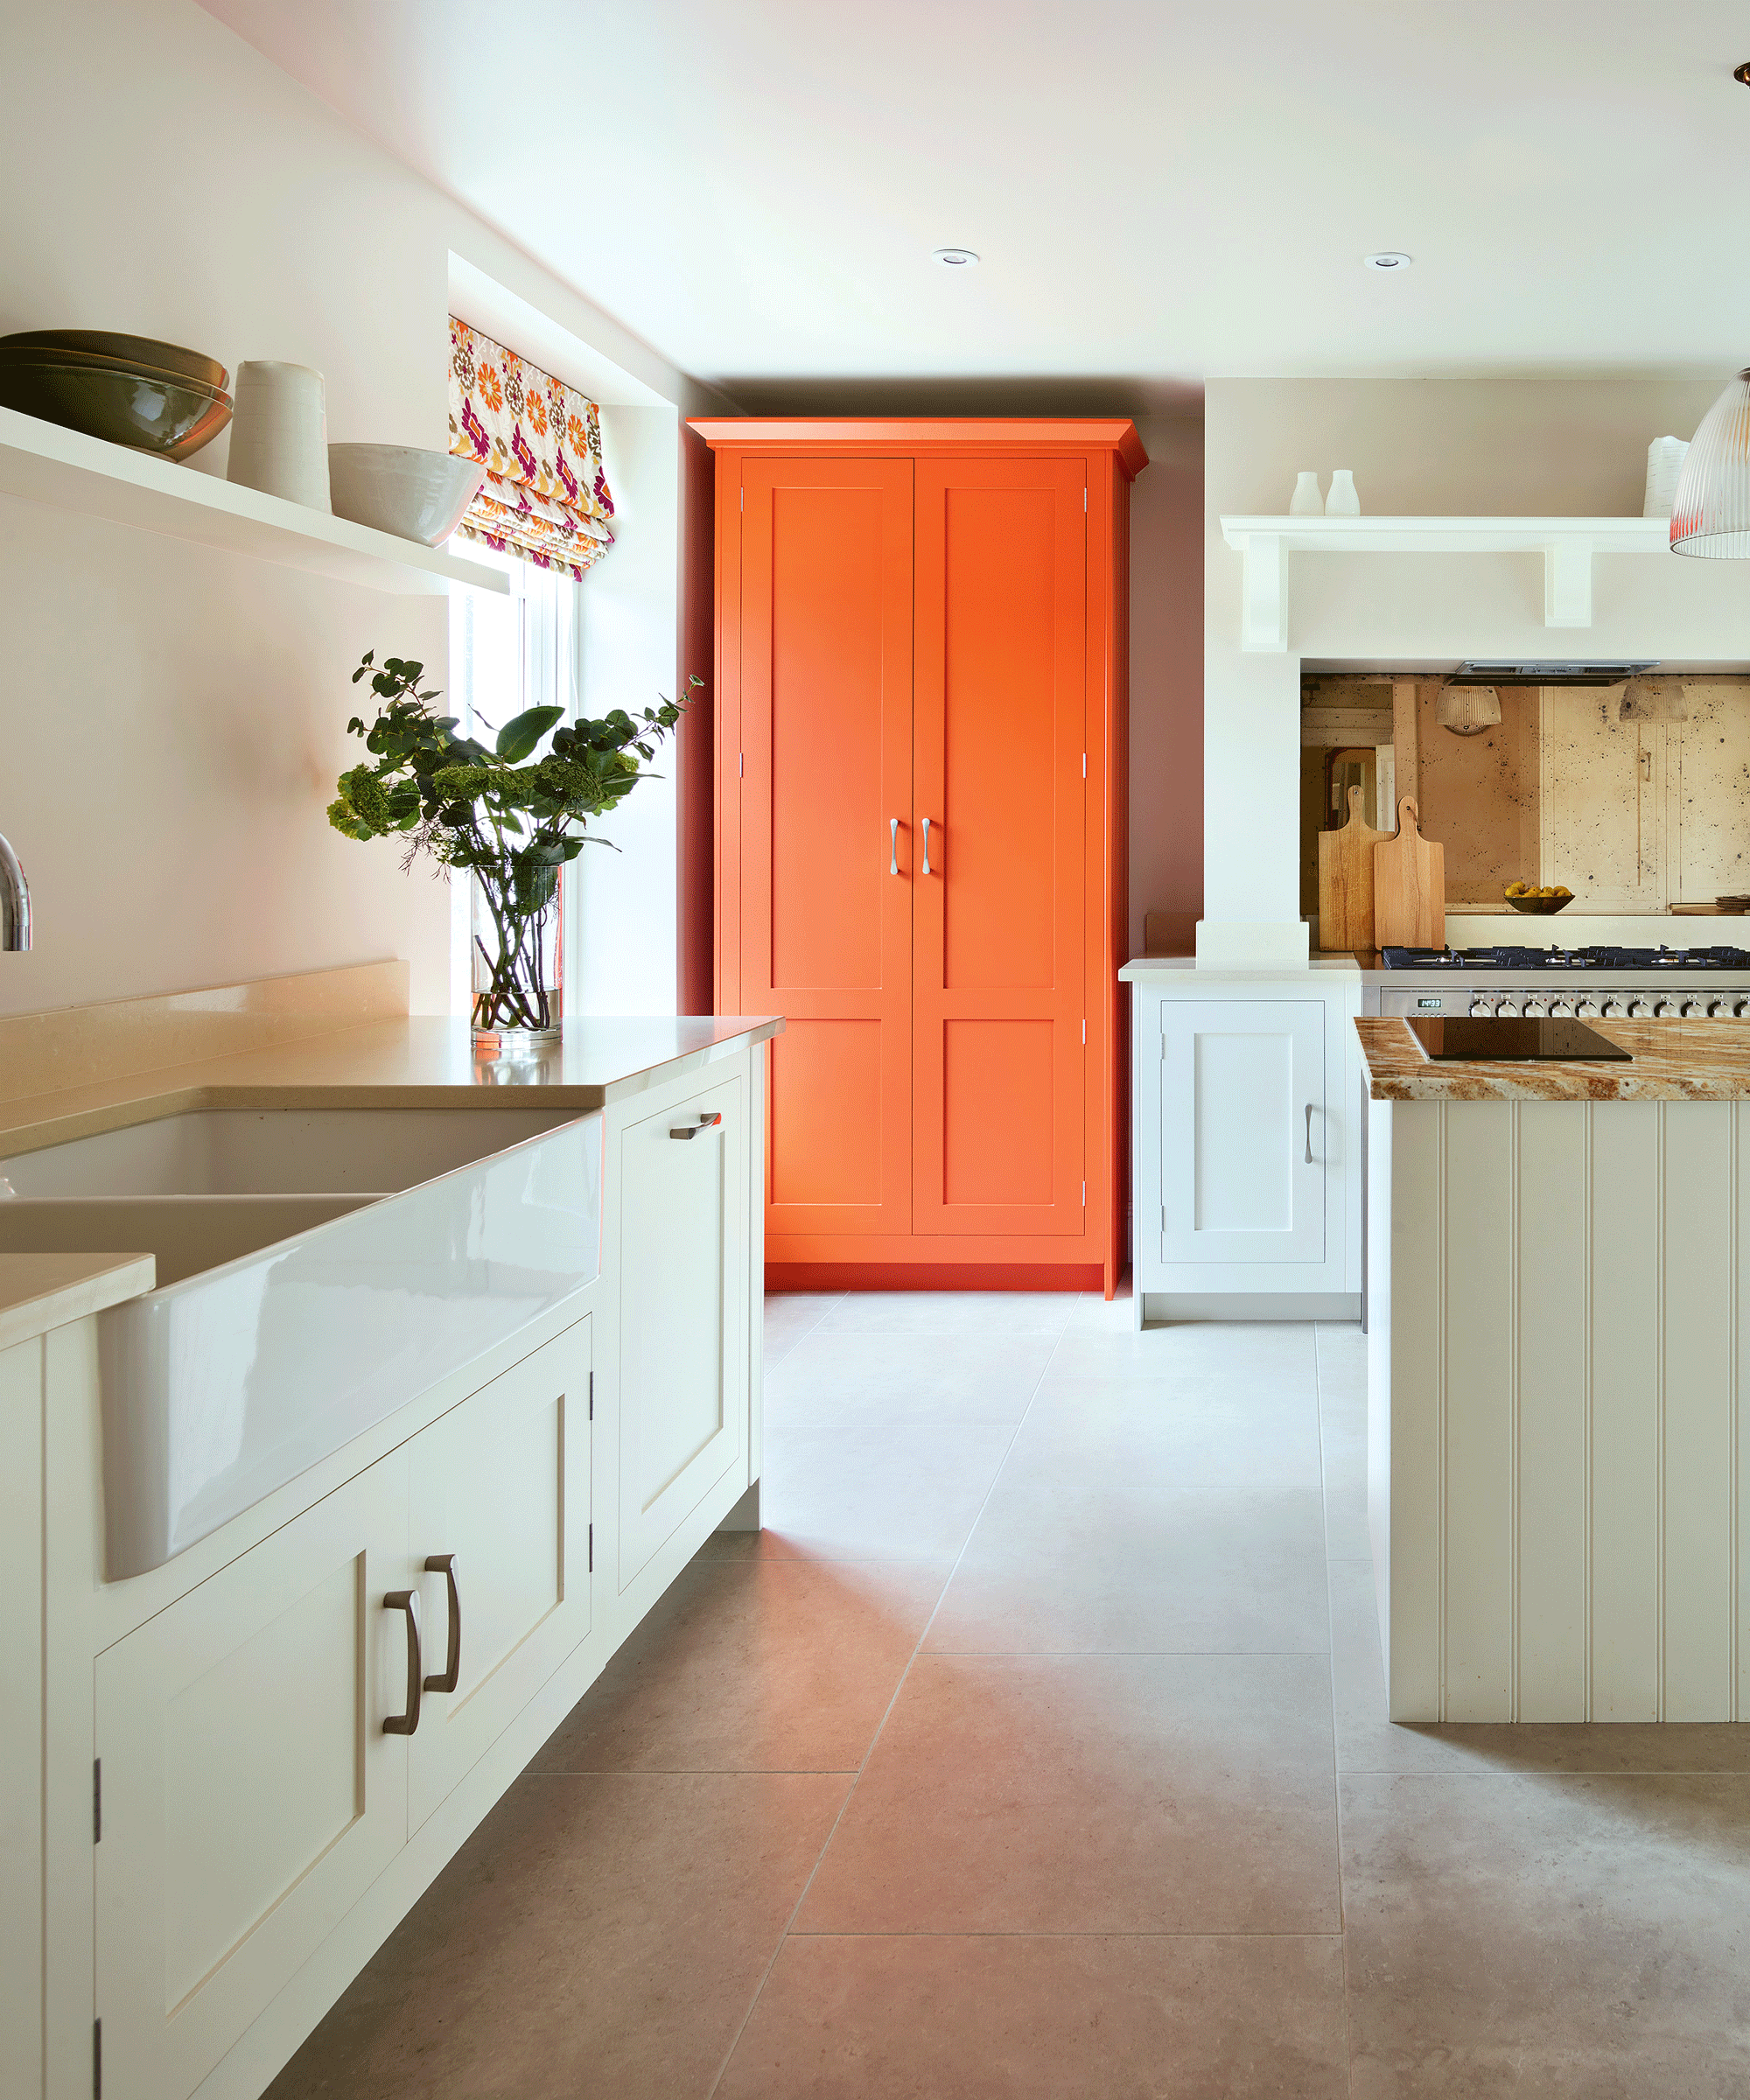 An example of freestanding kitchens showing an orange freestanding kitchen pantry cupboard in a cream kitchen